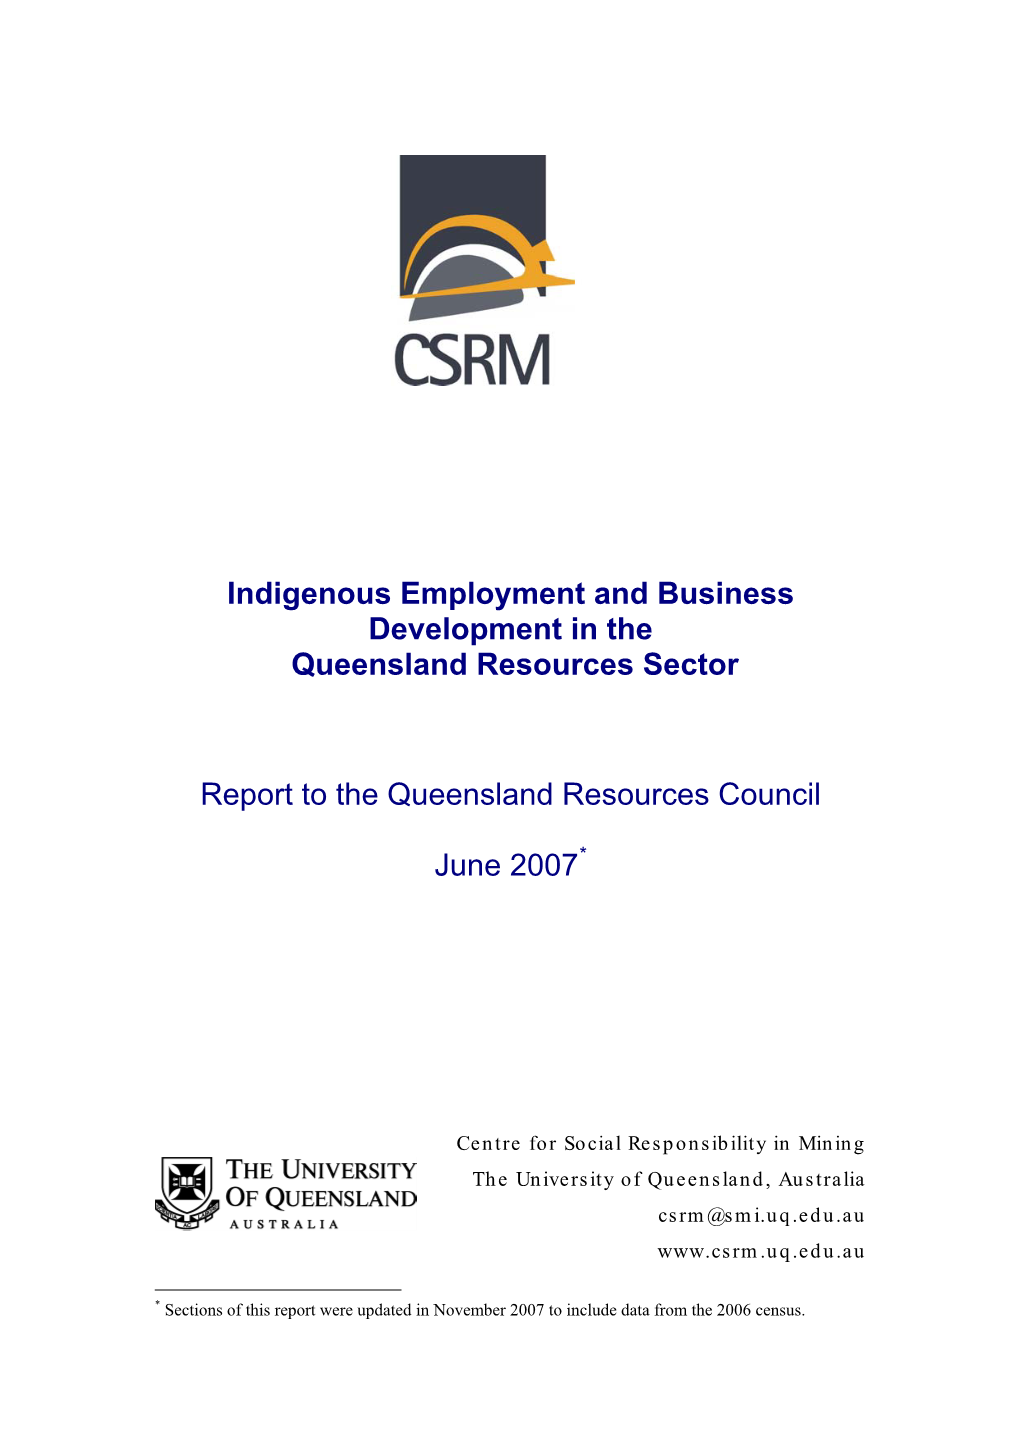 Indigenous Employment and Business Development in the Queensland Resources Sector